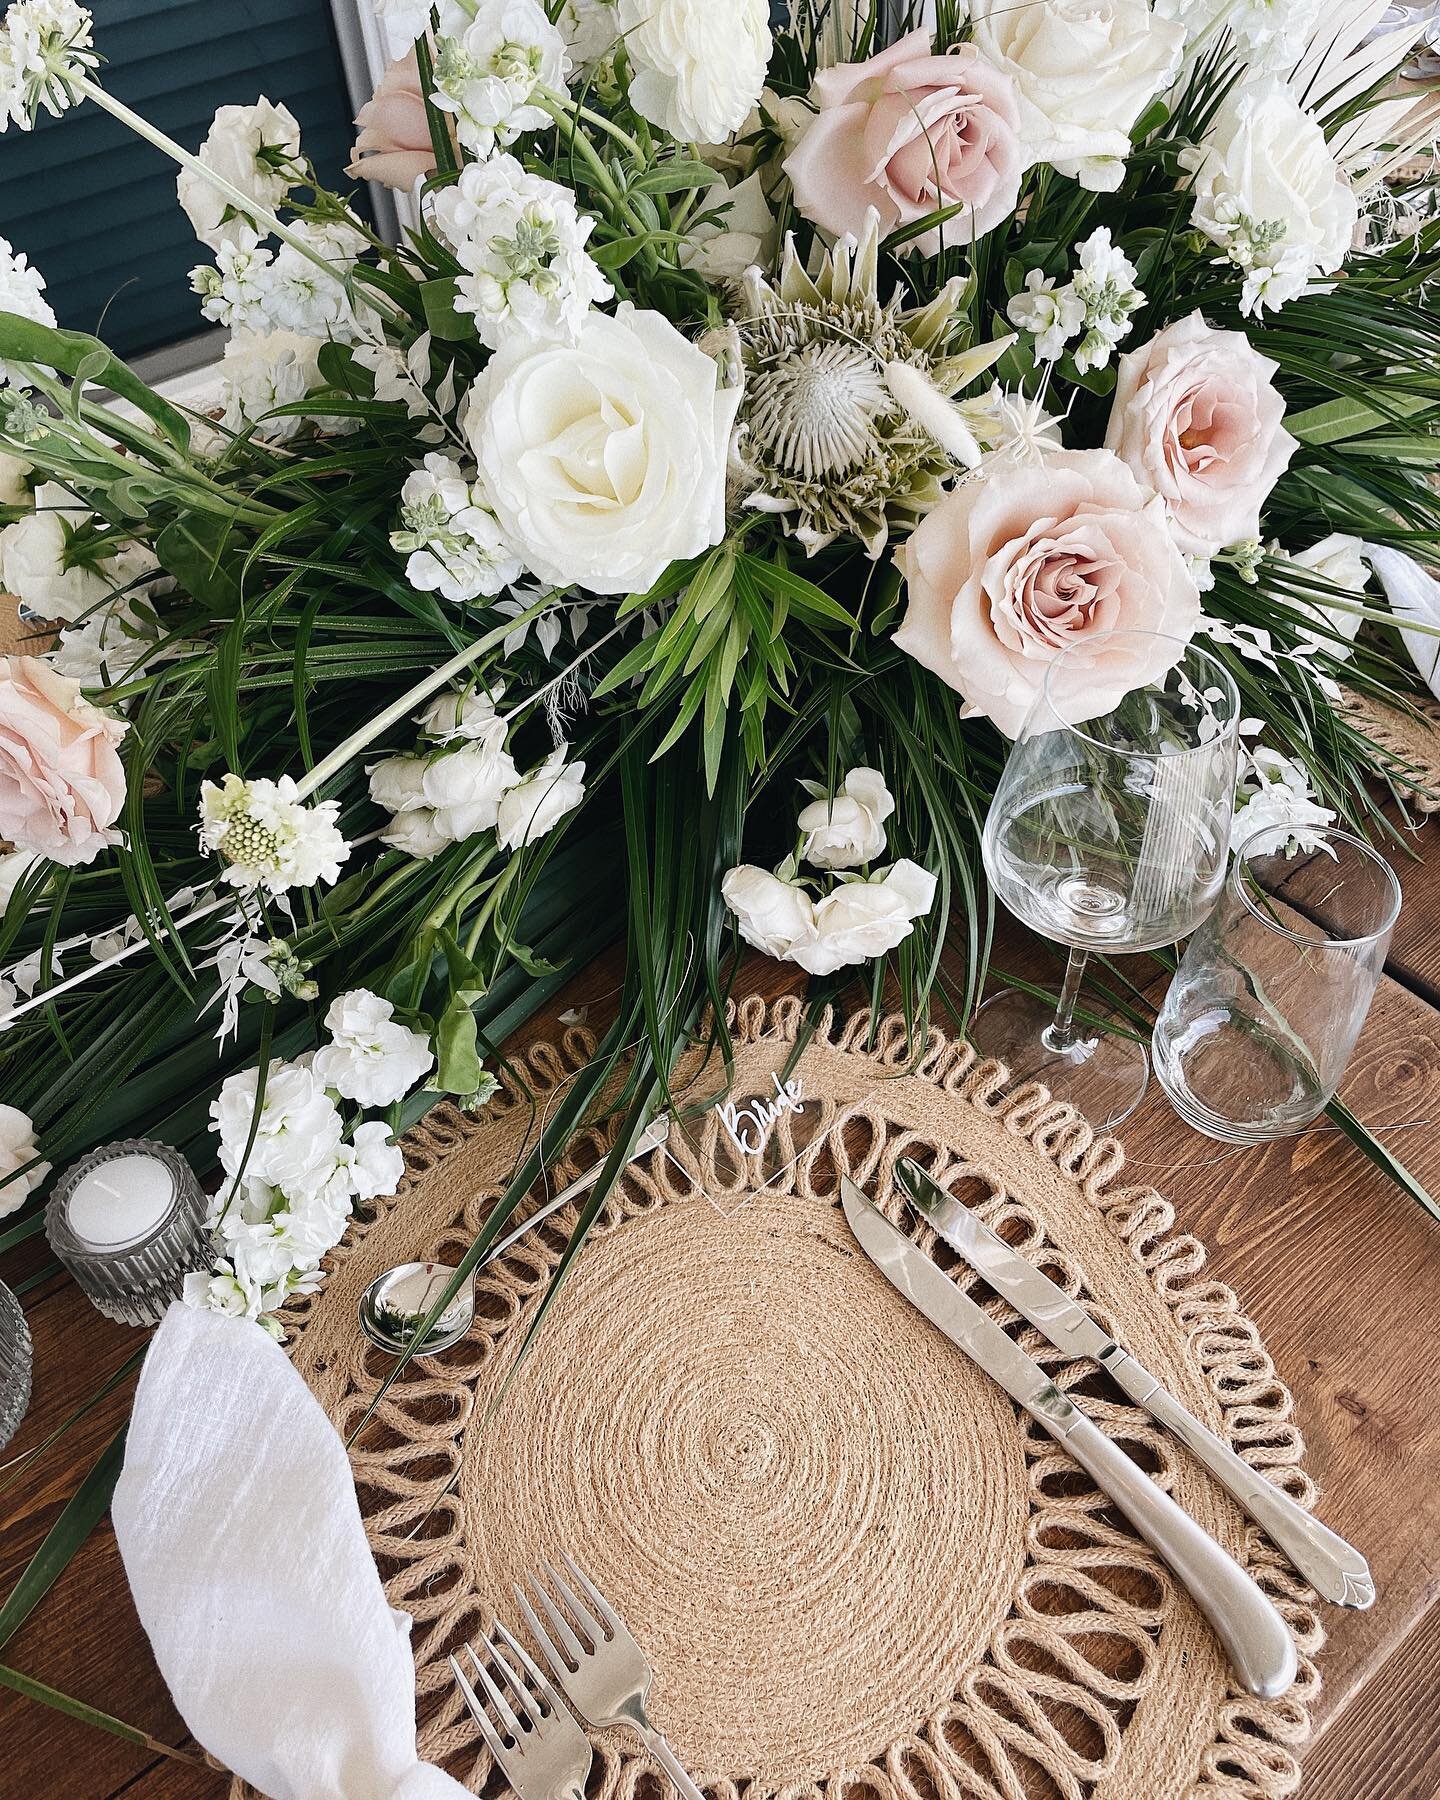 only the best for Alyson 🤍 head to stories for more little details. tables, linens, florals by us for a sweet 18 person gathering at a beachfront home in vilano beach 🌞